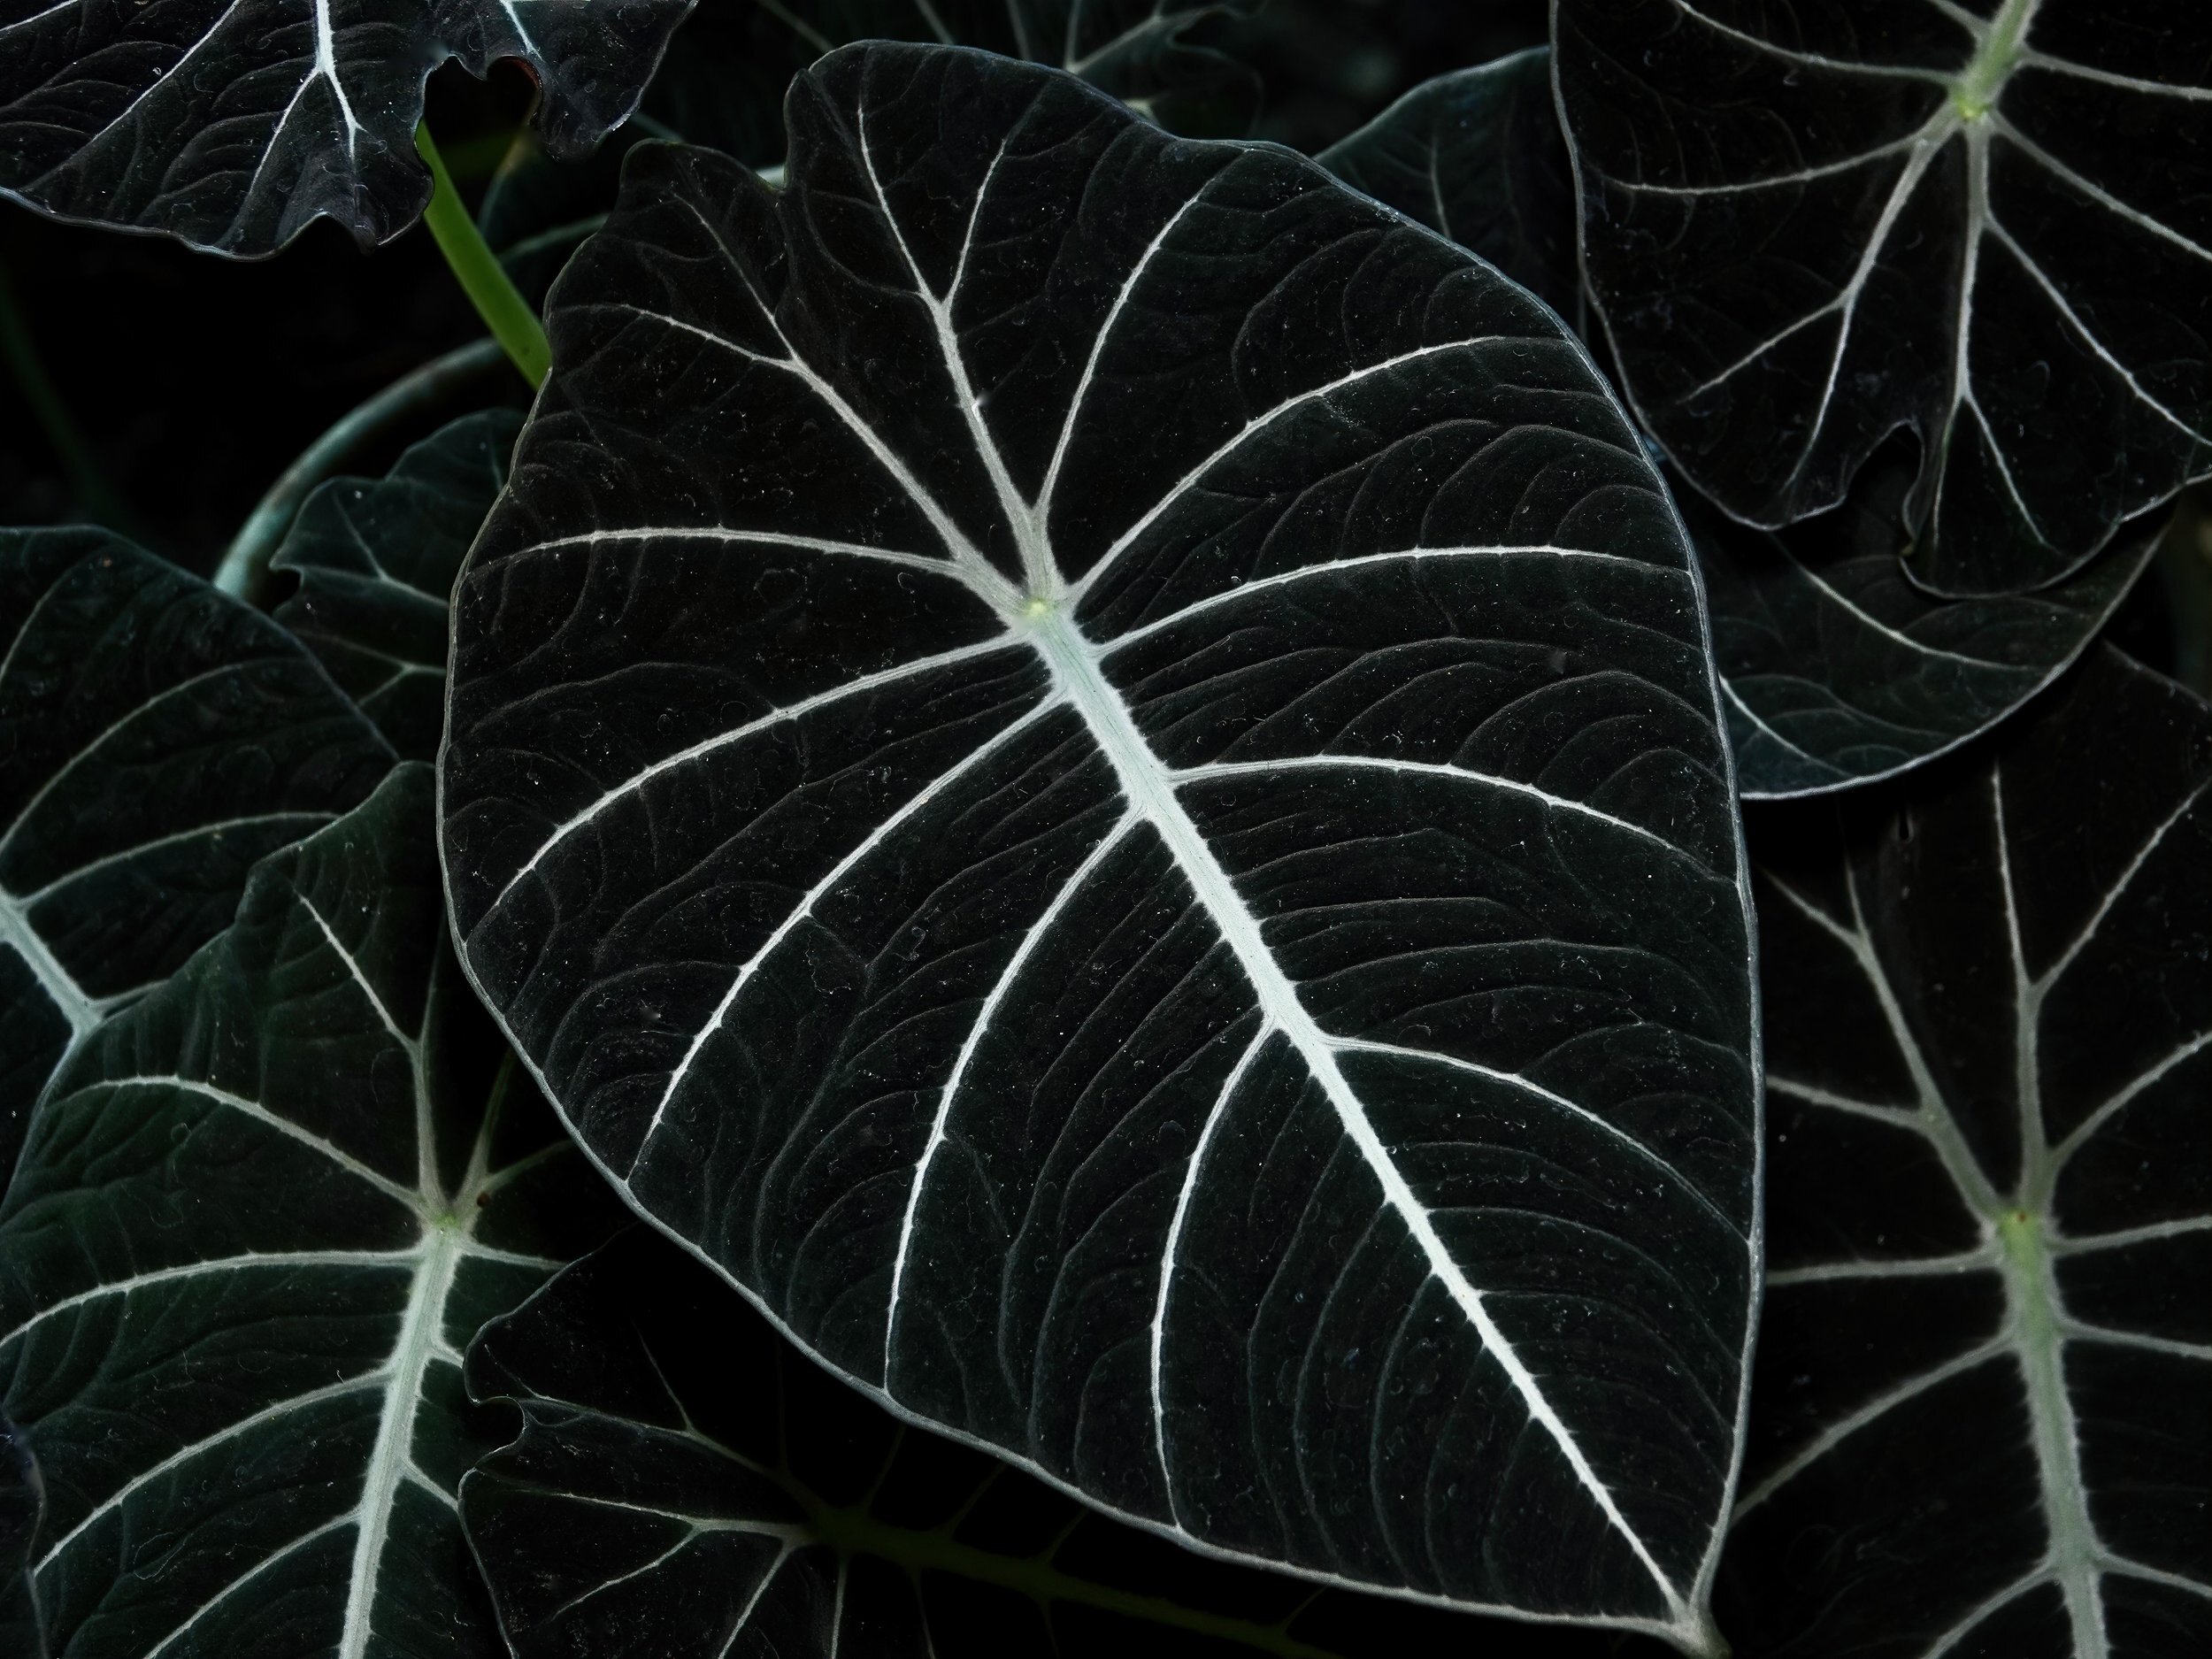 Youngleaf Com - Velvet leaf anthuriums in cultivation by Jay Vannini â€” Exotica Esoterica